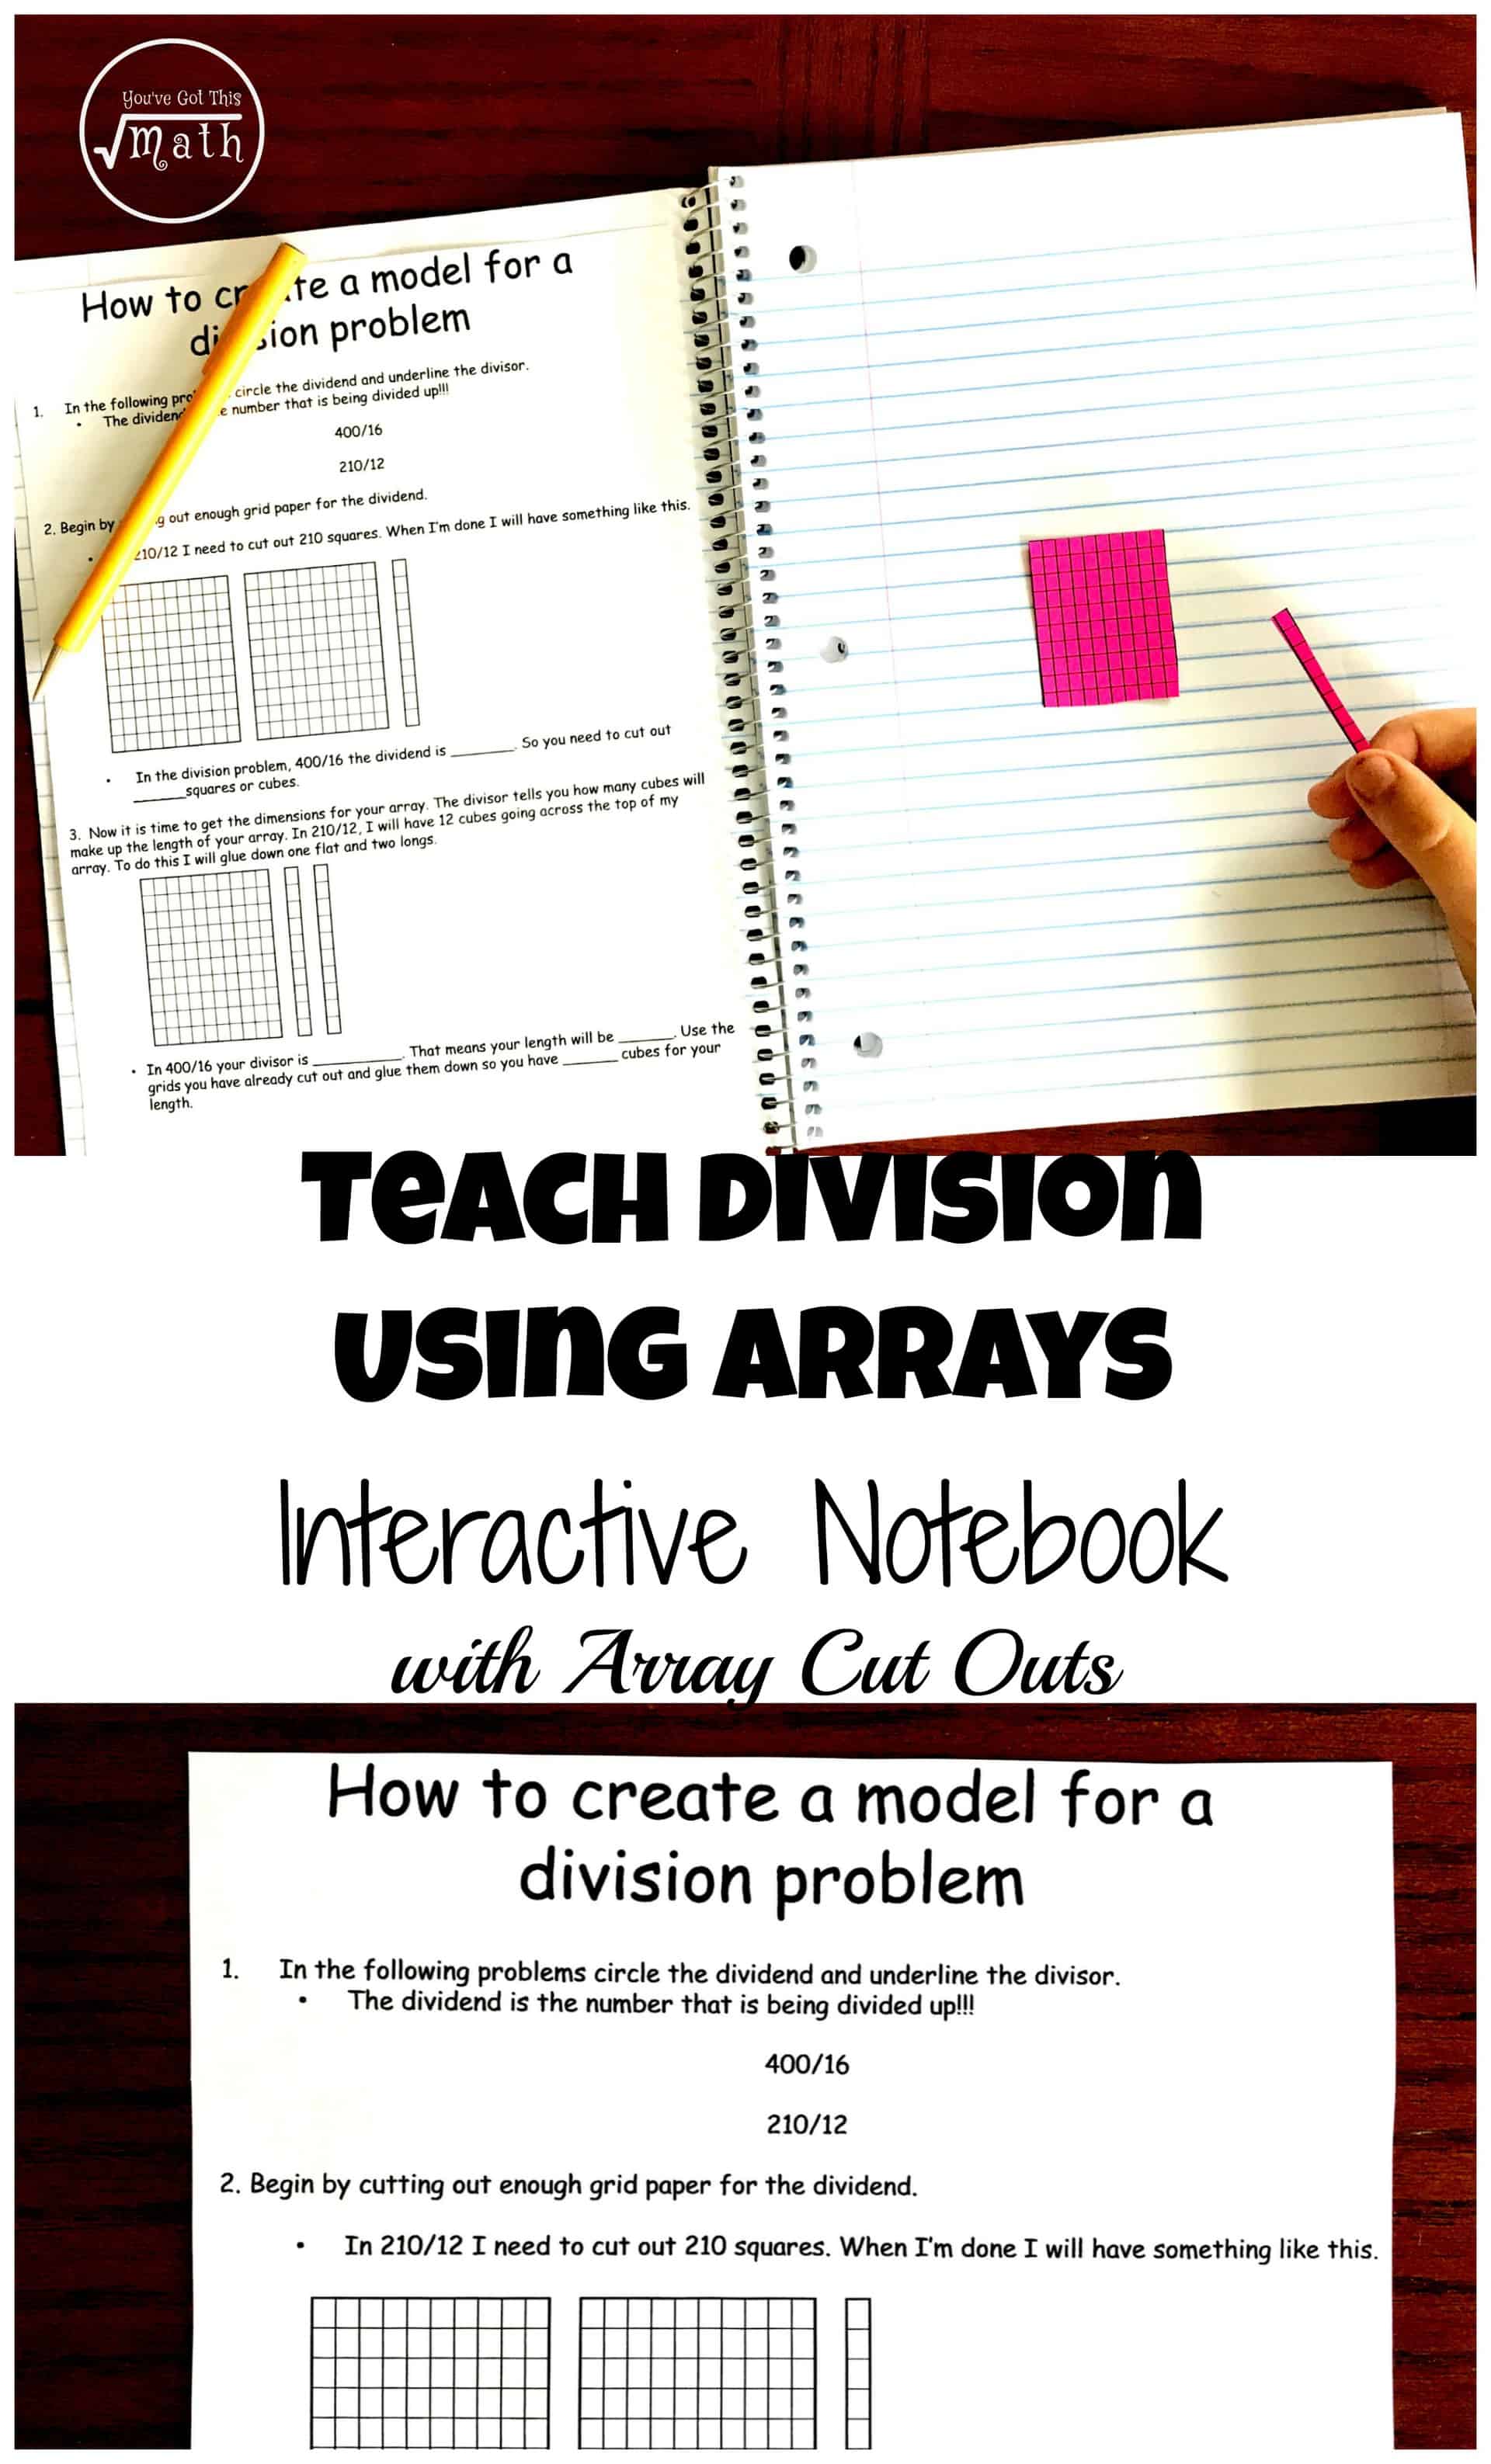 How to teach division using arrays (FREE interactive notebook)